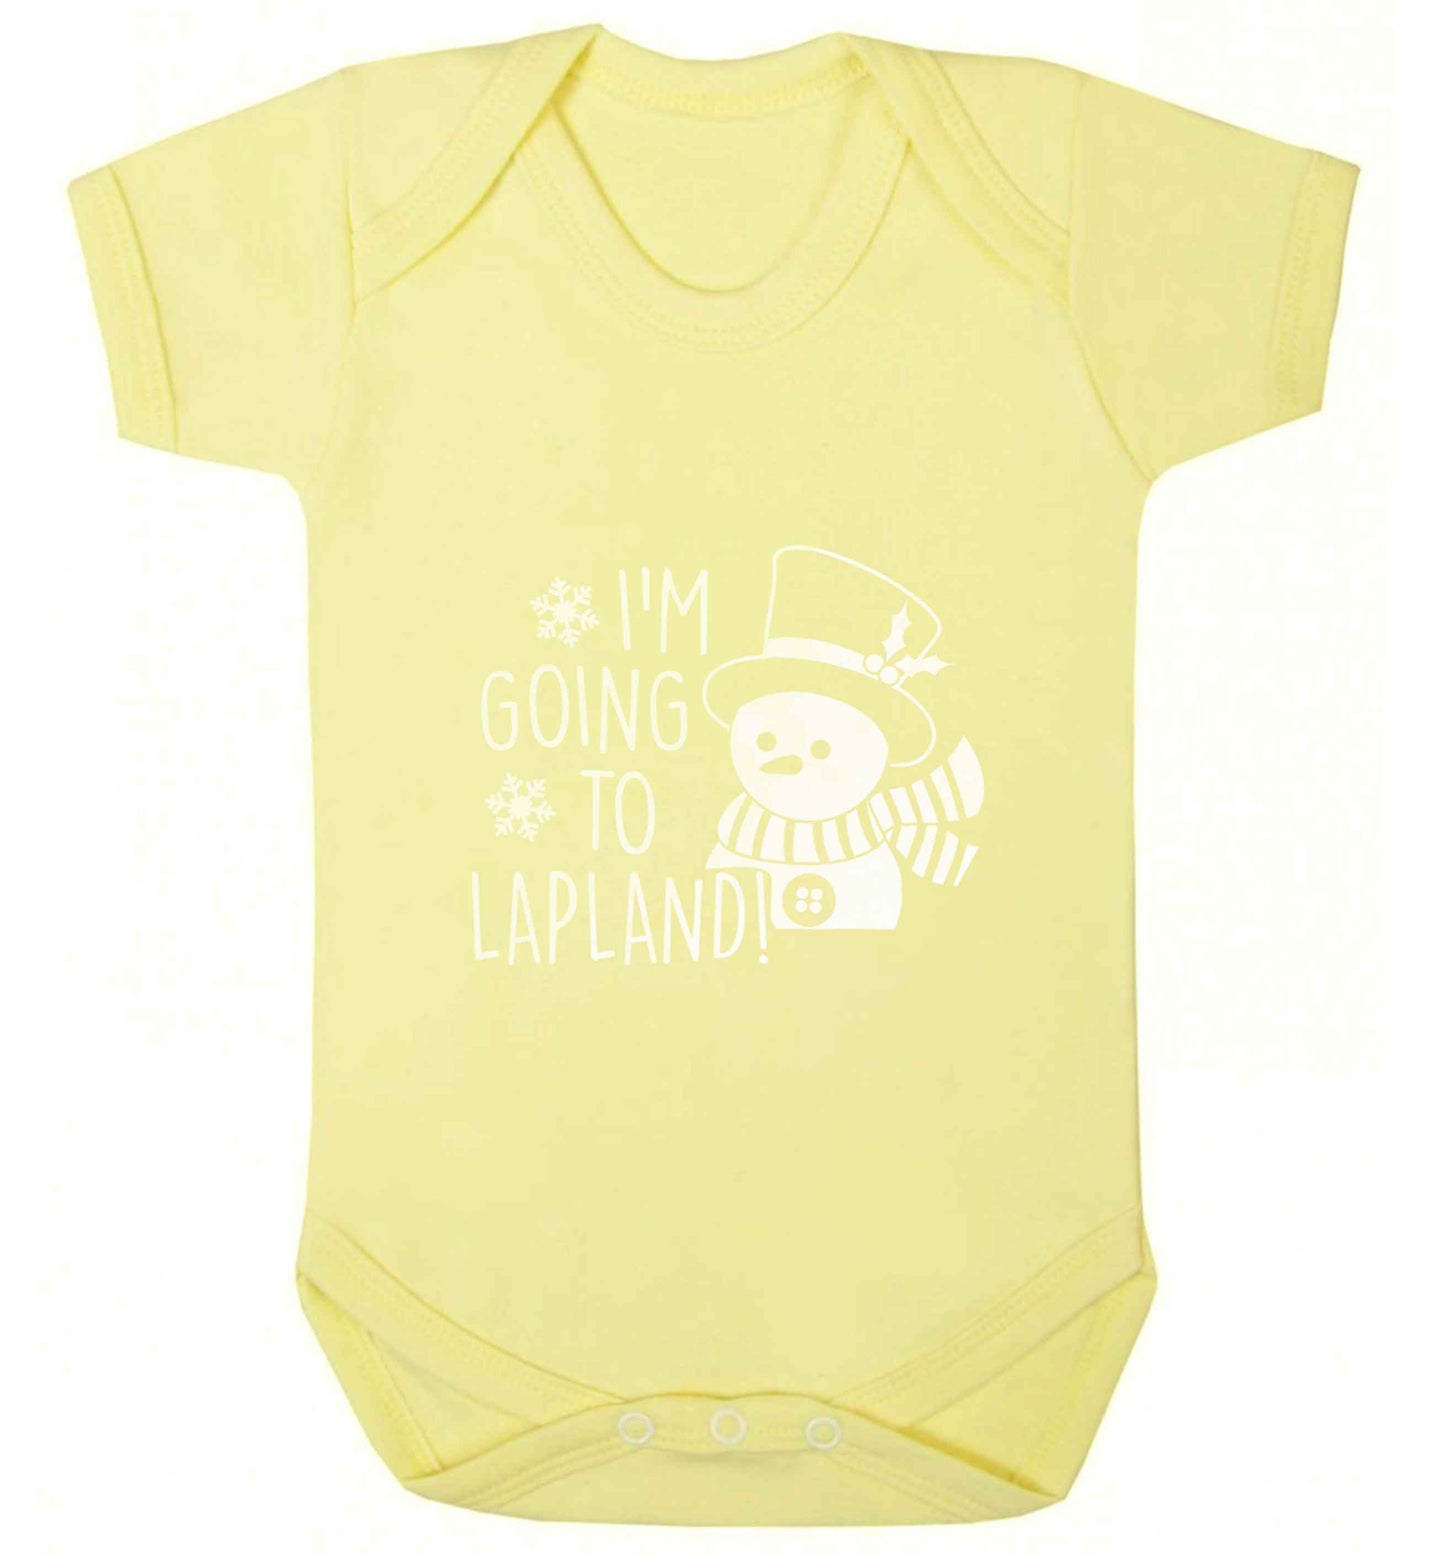 I'm going to Lapland baby vest pale yellow 18-24 months